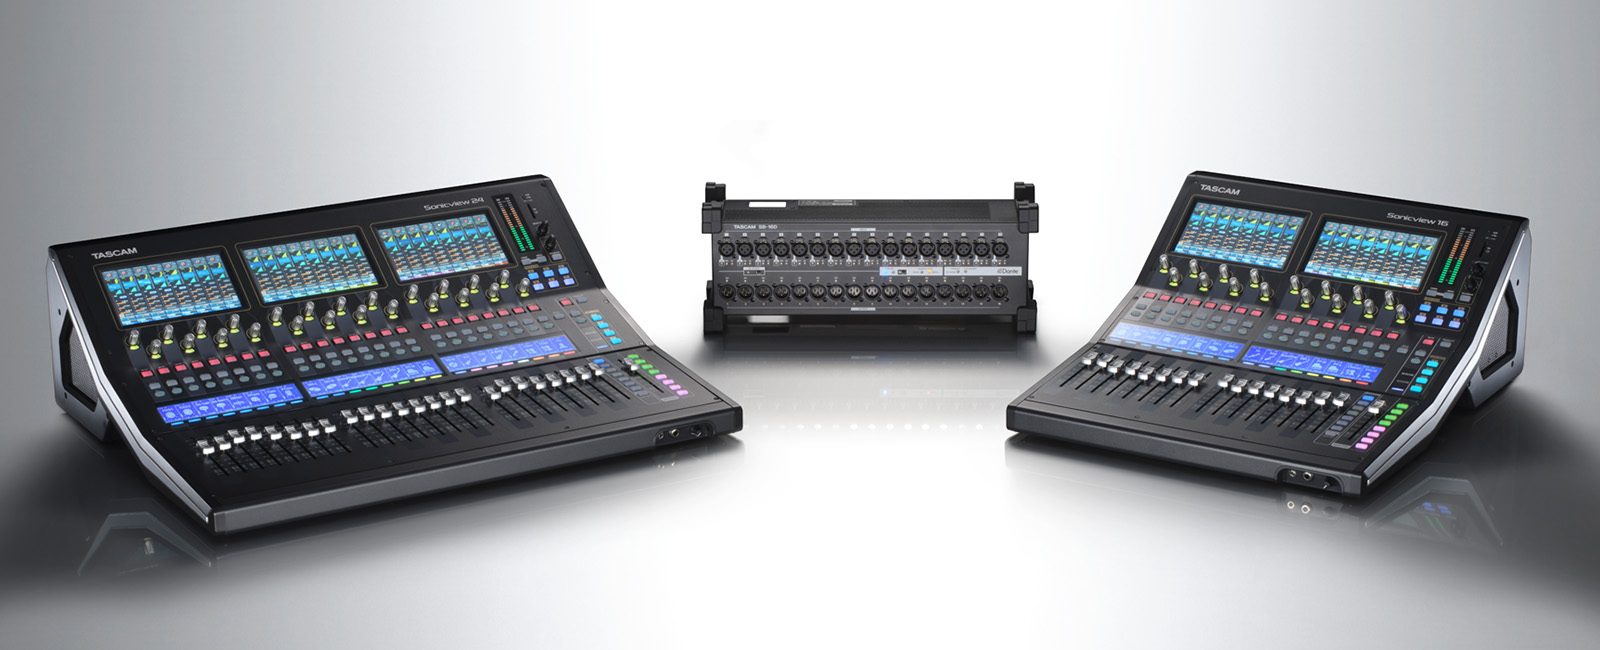 TASCAM Announces the TASCAM Sonicview Digital Mixers with Multi-Environment Touch Screens